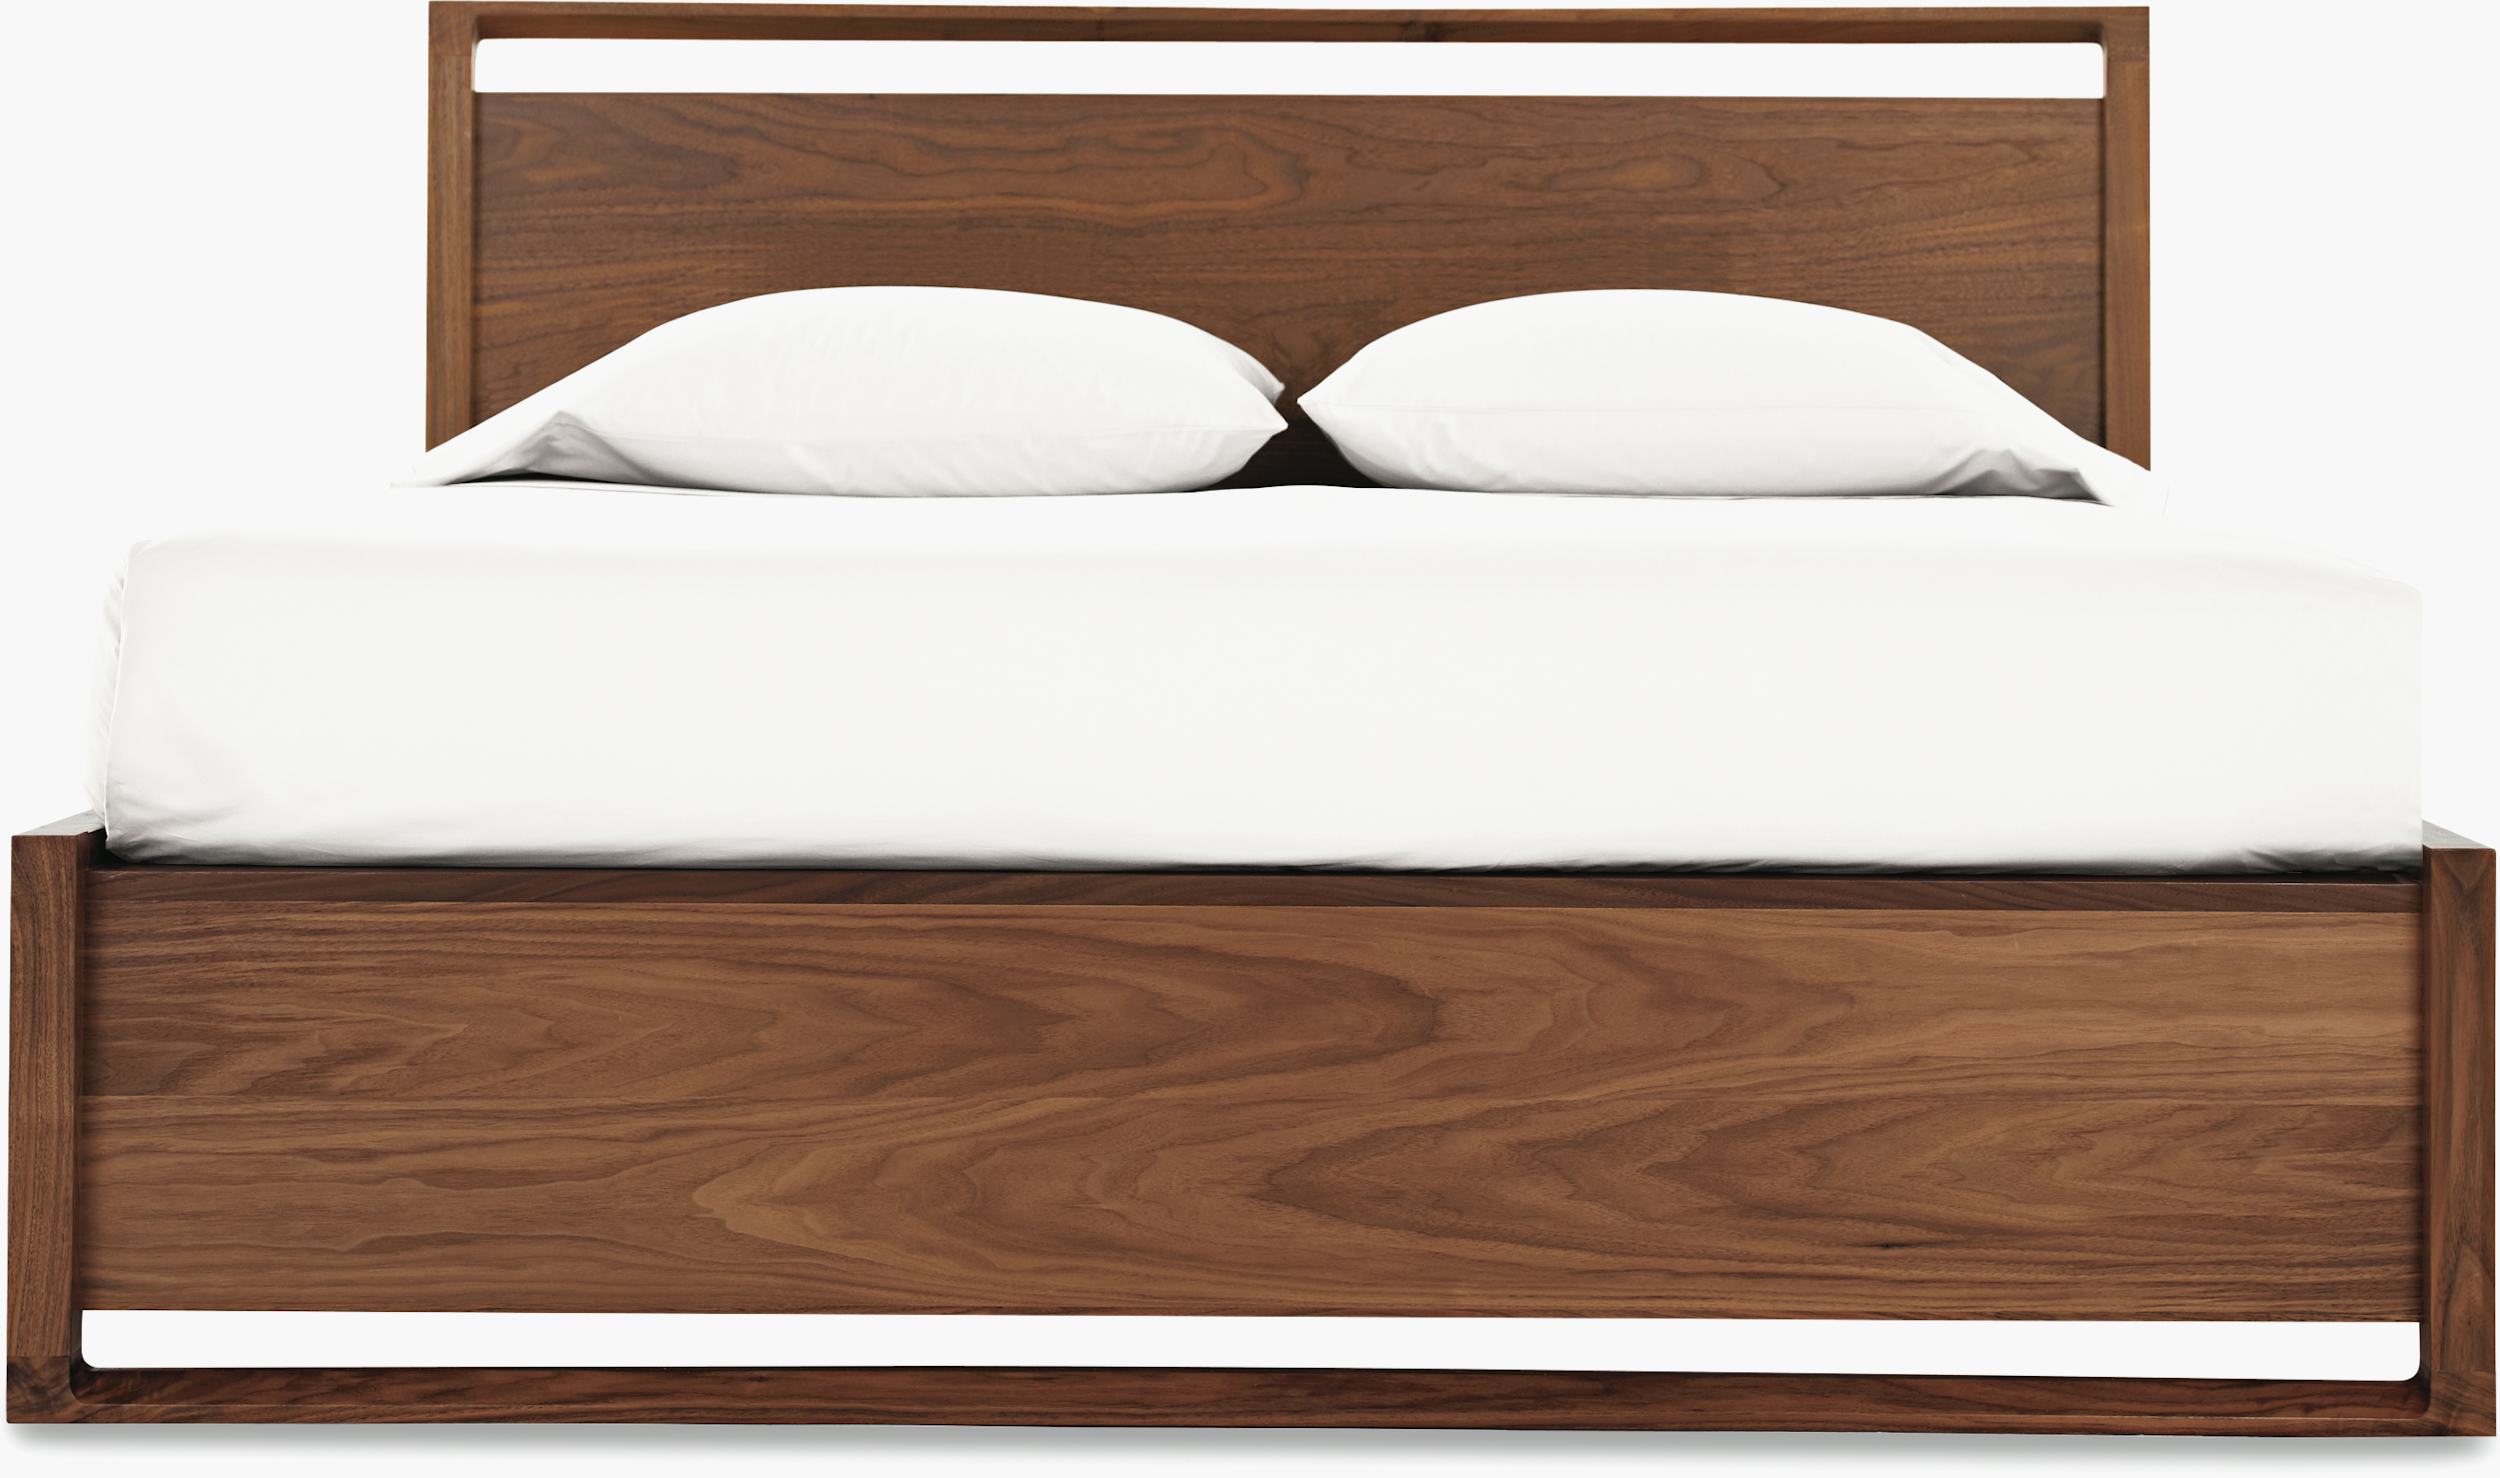 Matera Bed Reach Design – Within